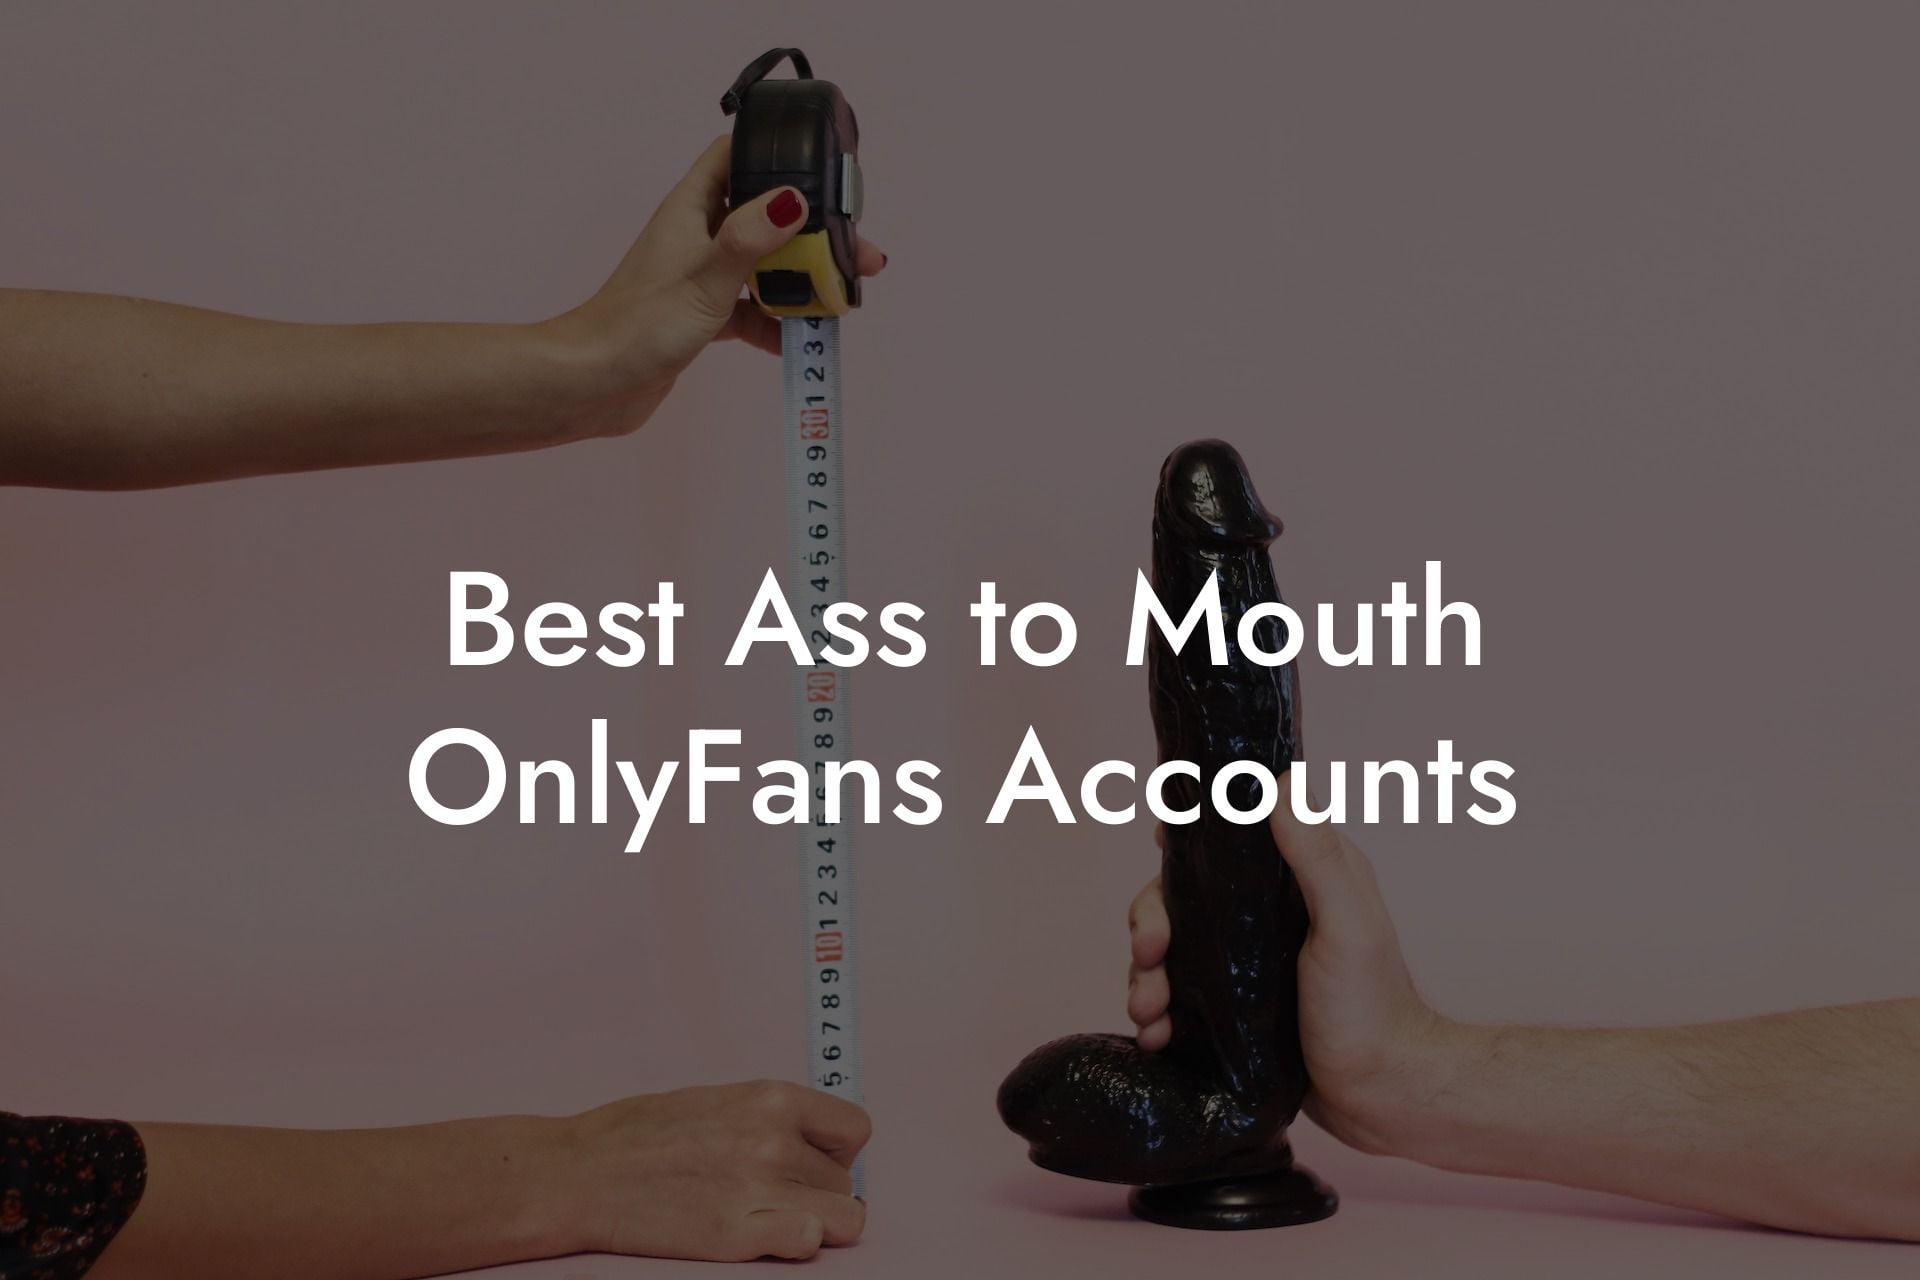 Best Ass to Mouth OnlyFans Accounts